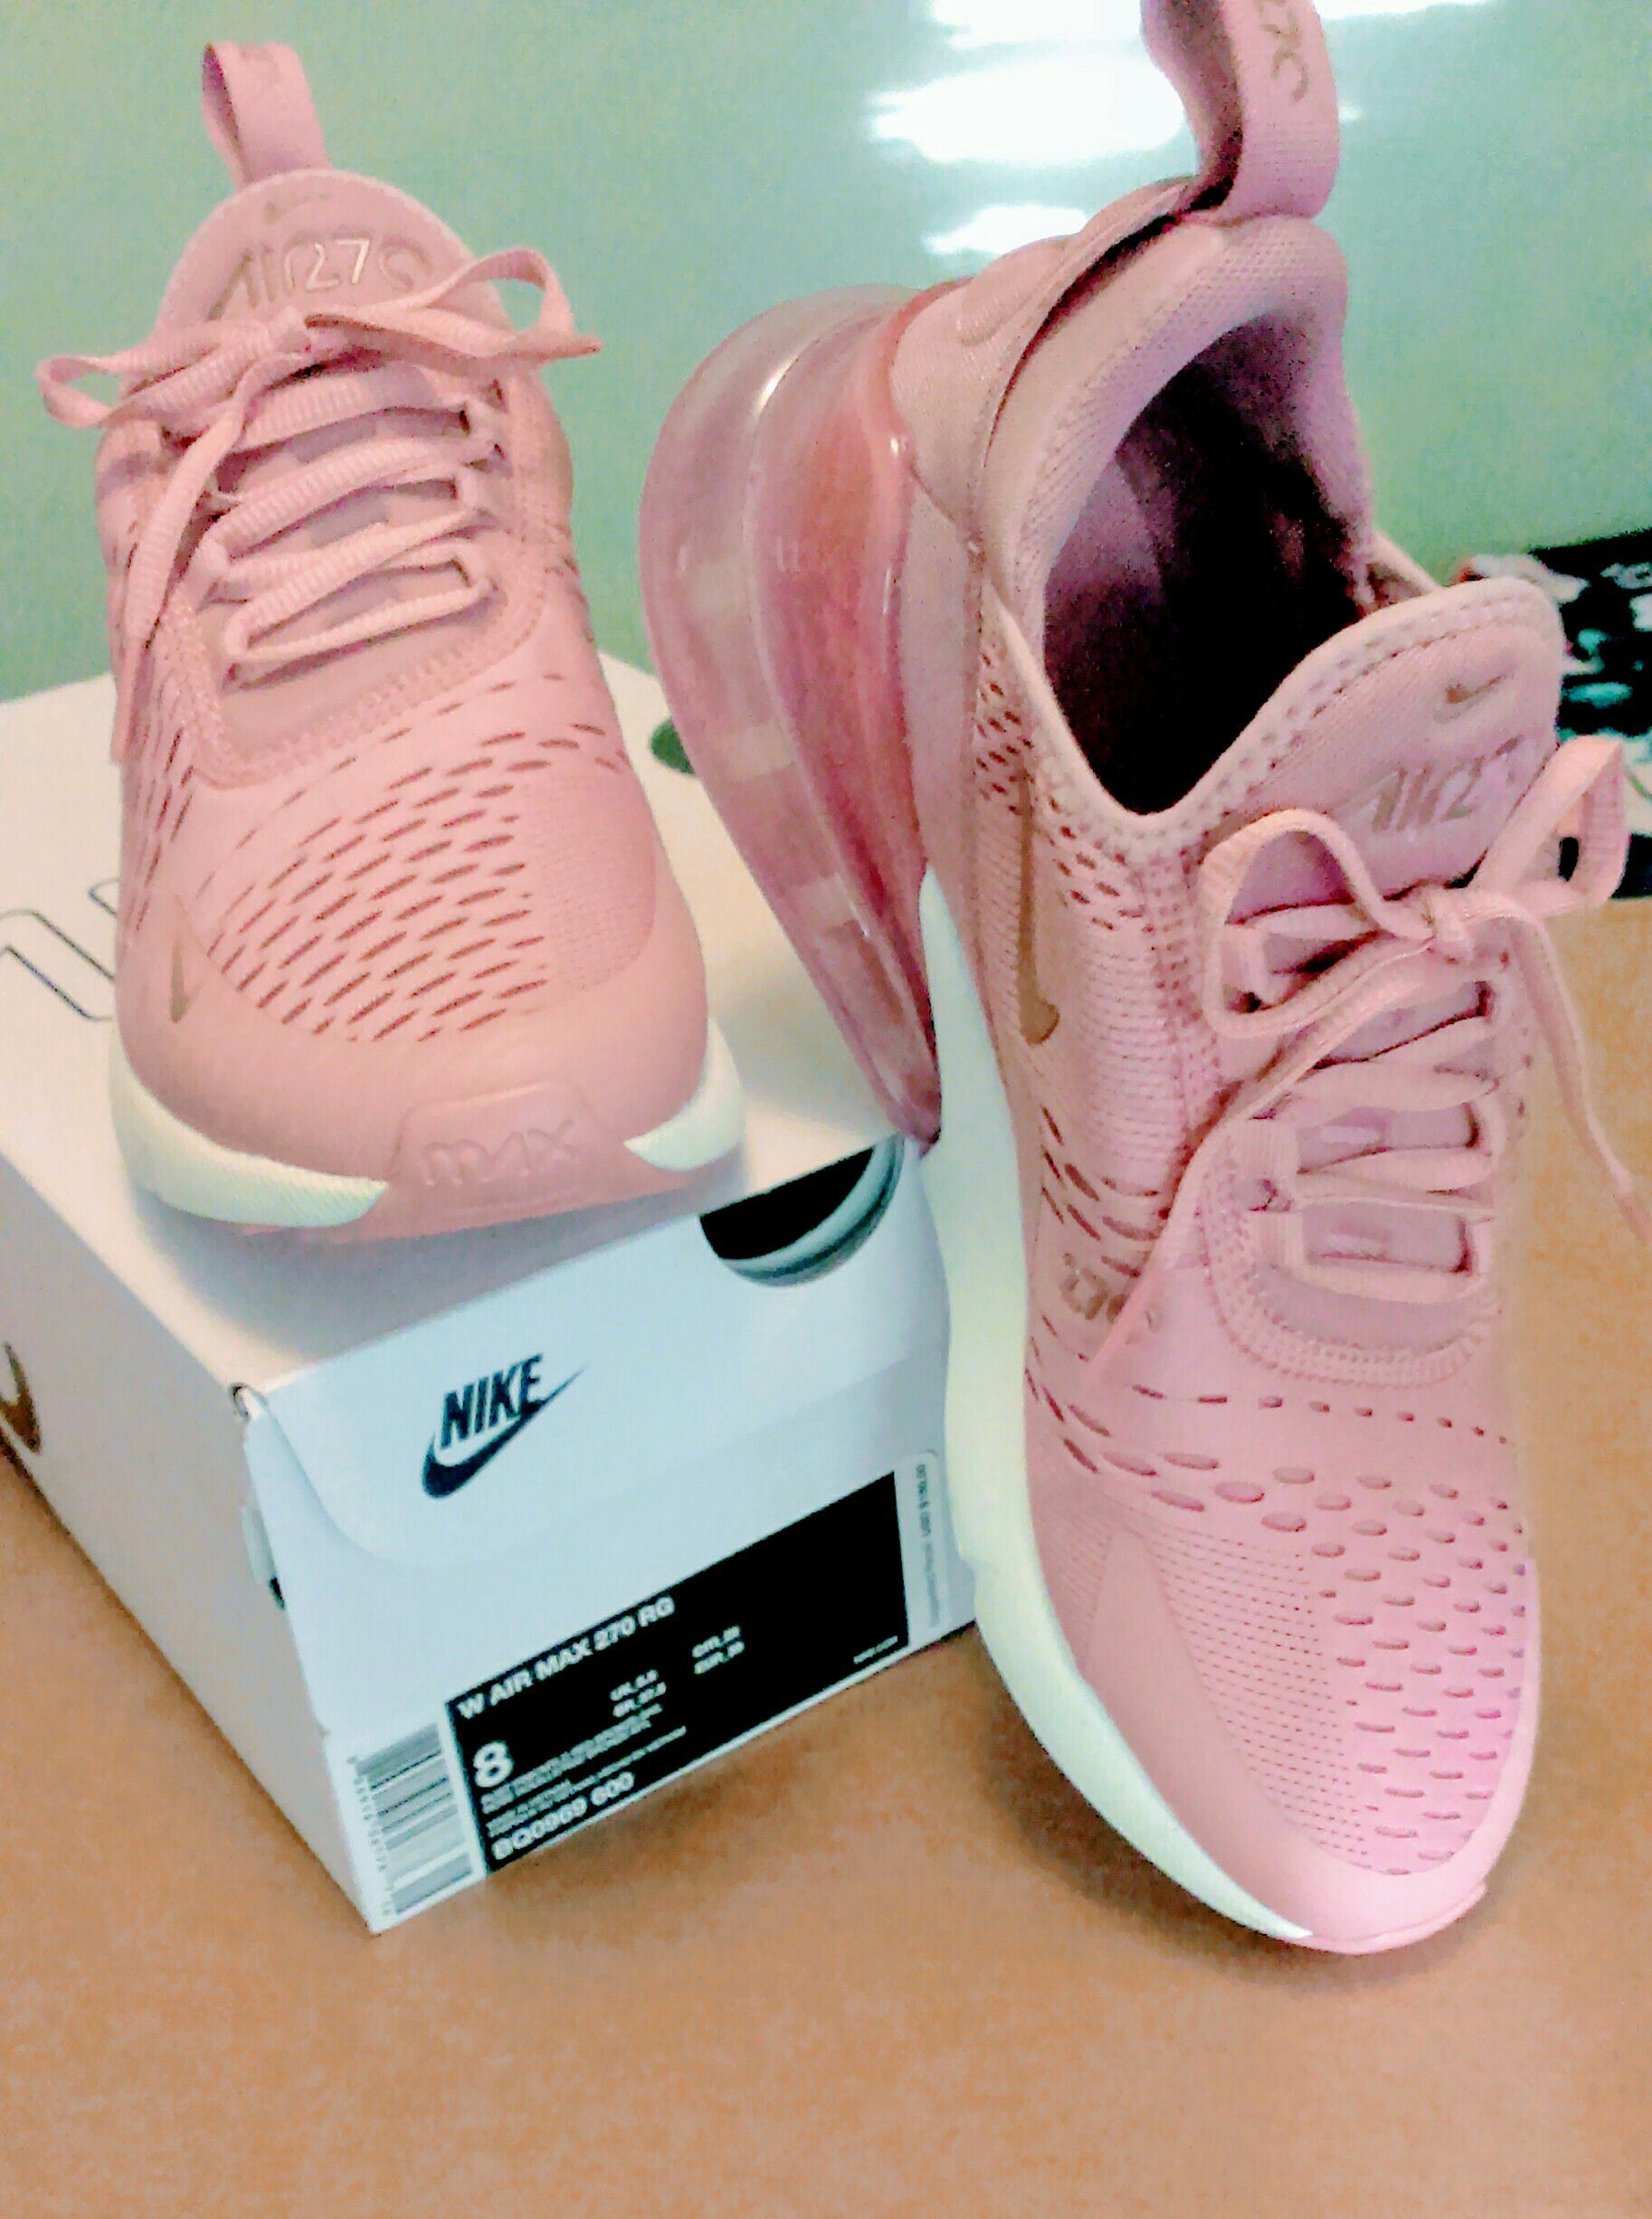 Relajante Mecánico bordado Nike Air Max 270 Rust Pink Size 8 for Sale in Pasadena, CA - OfferUp